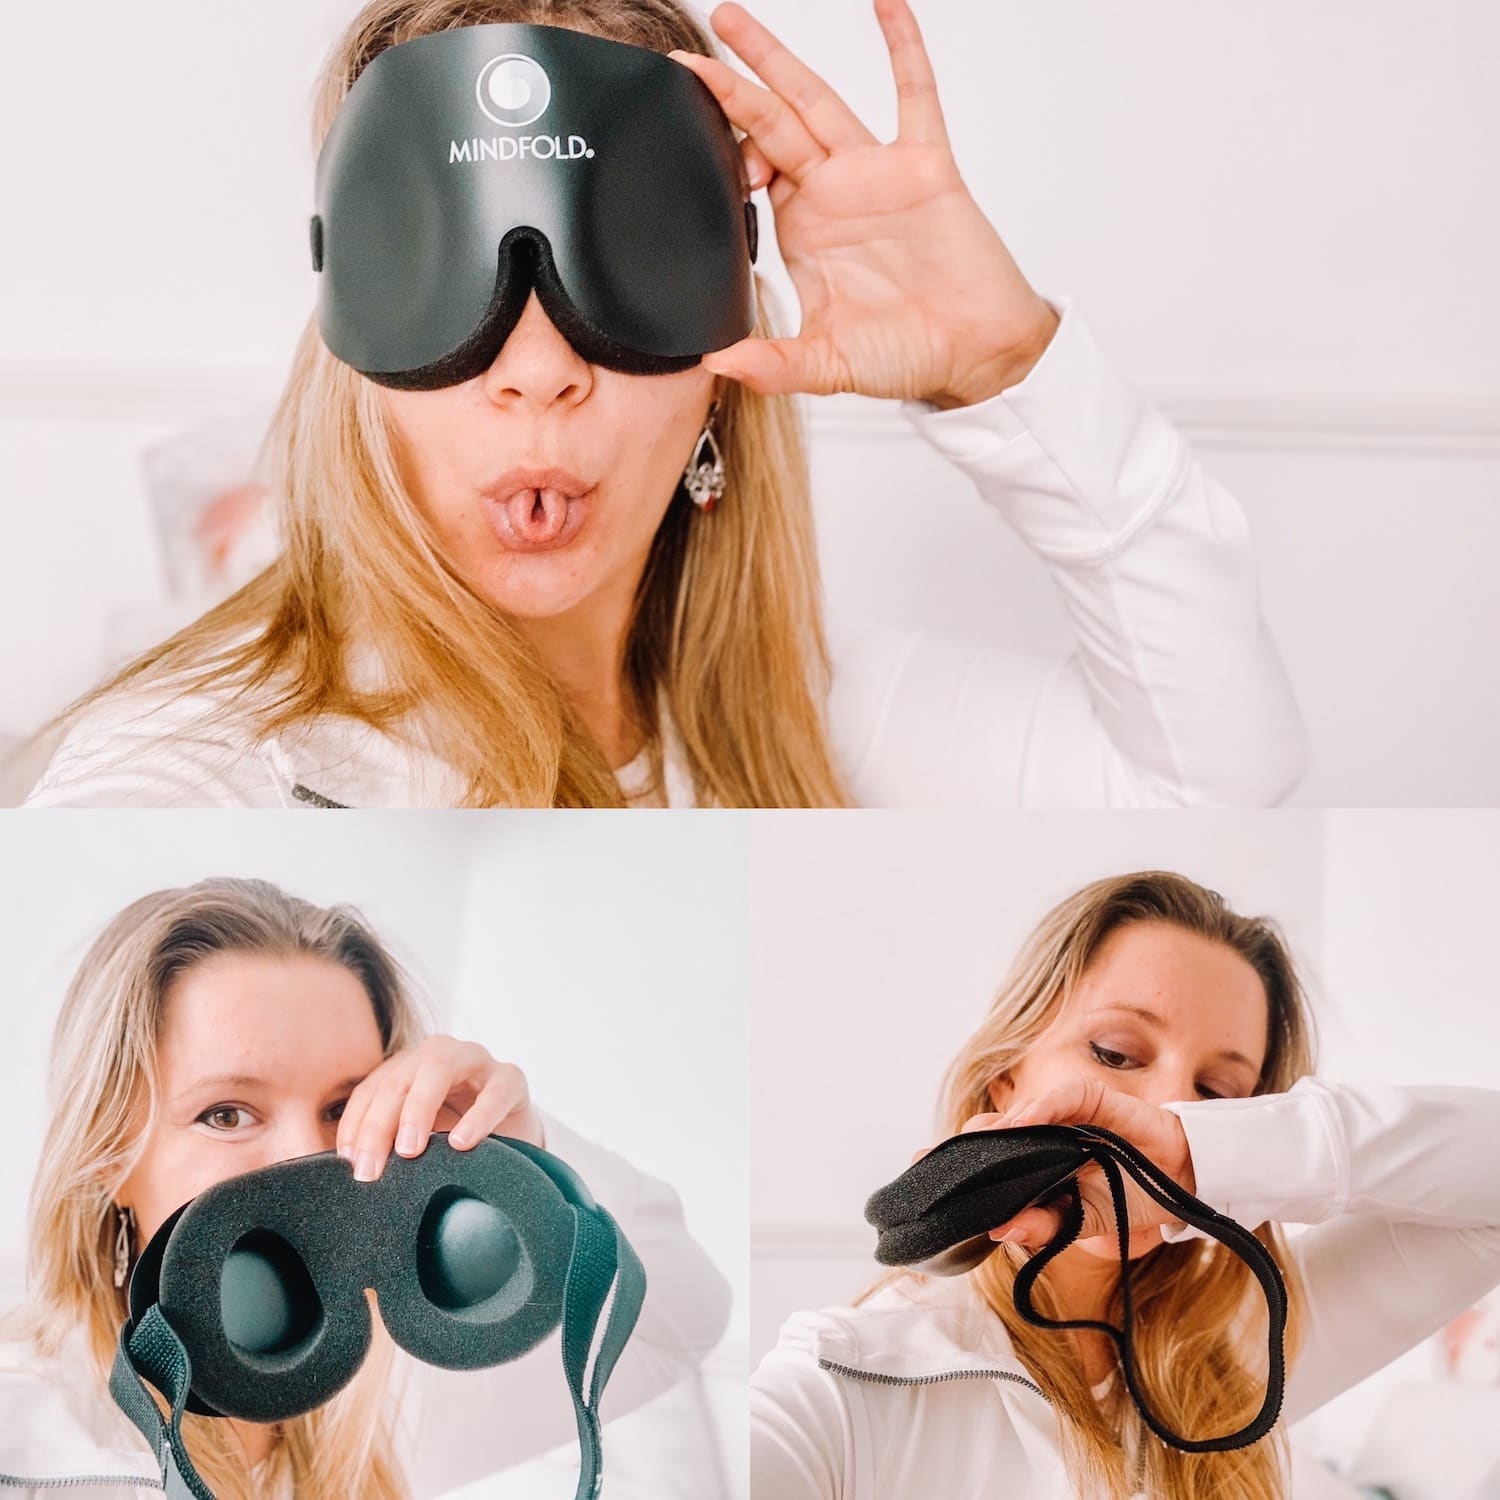 Mindfold sleep mask review by Anya Andreeva, Live Love Raw